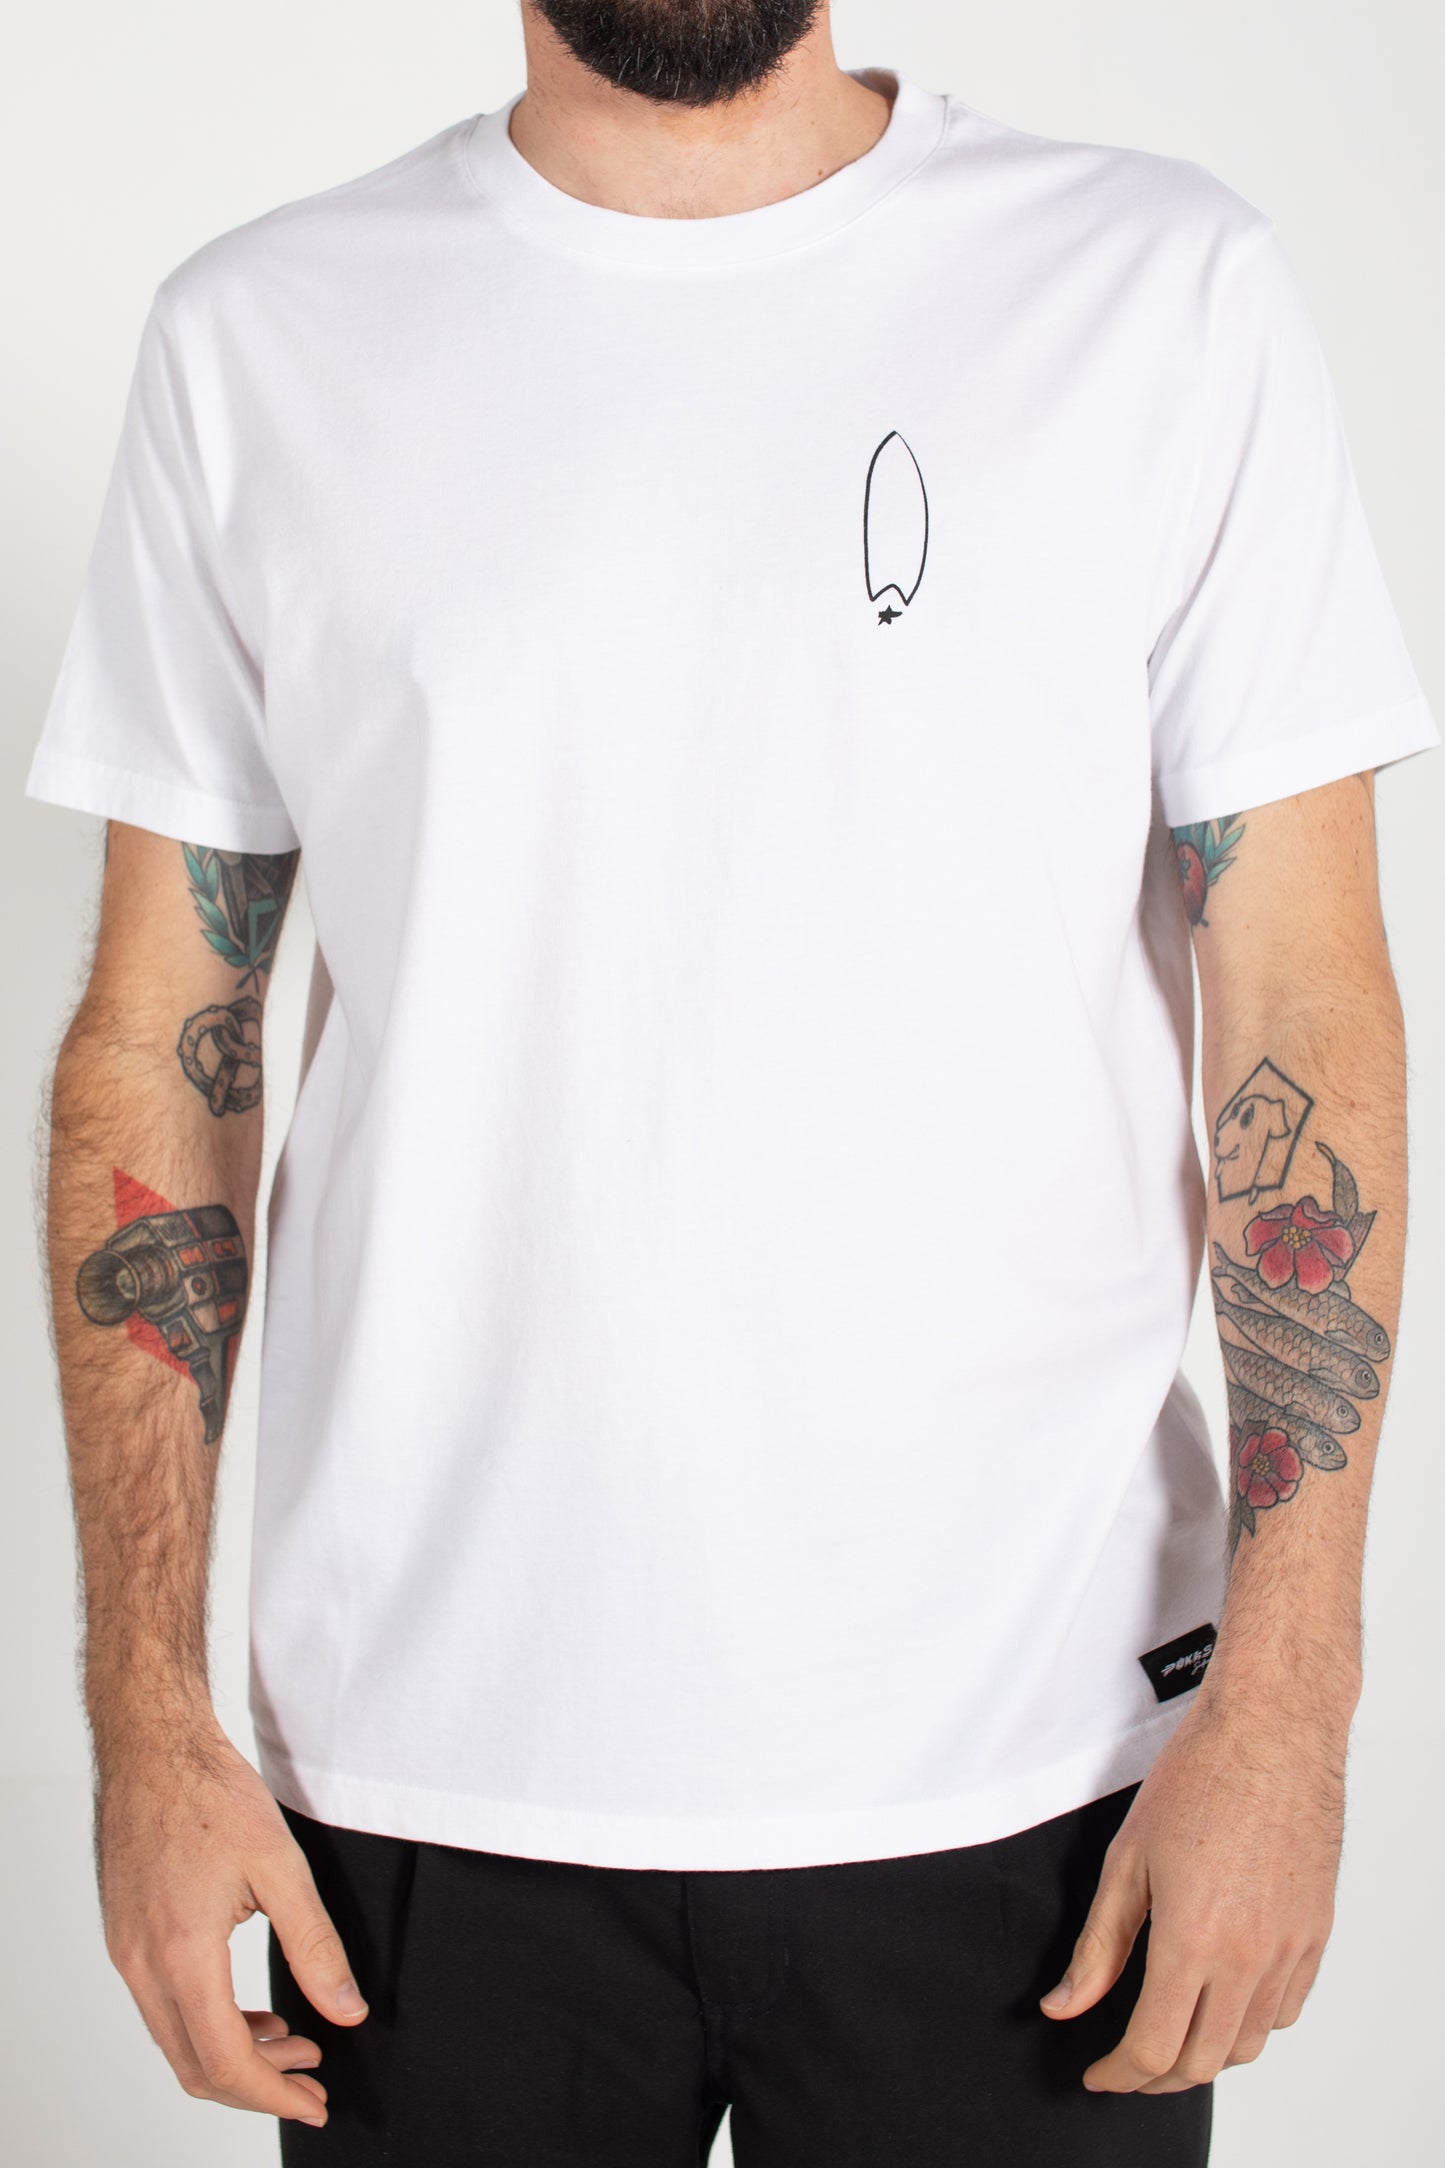 Pukas-Surf-Shop-Surfing-The-Basque-Country-Donostia-tee-man-white